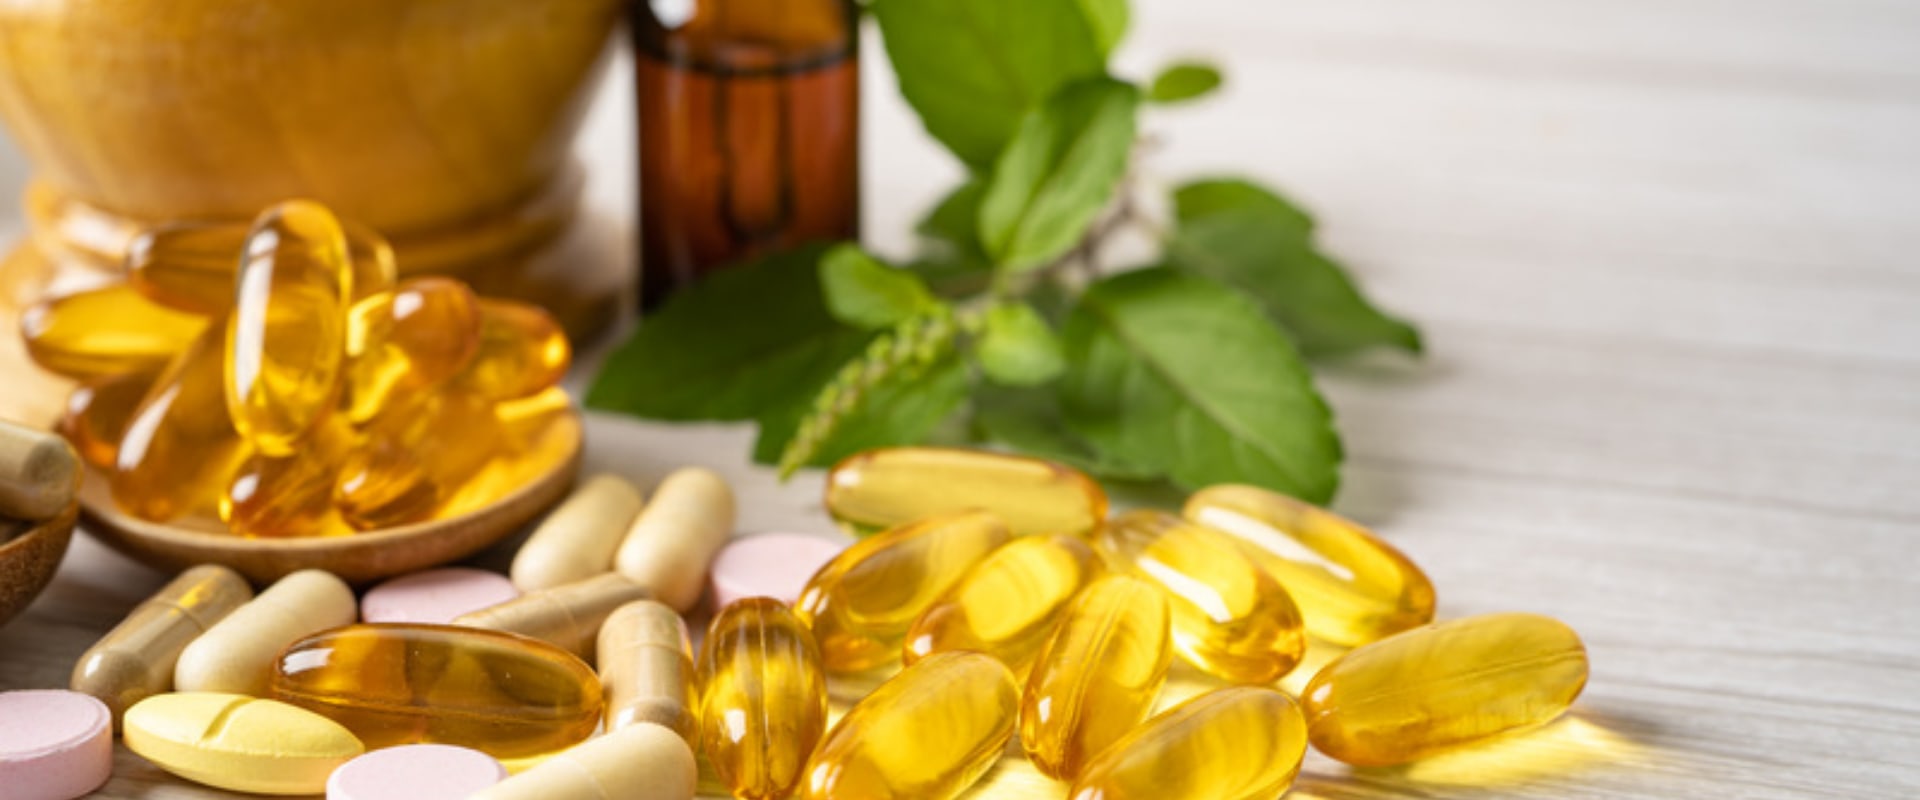 What is the most absorbable form of supplements?